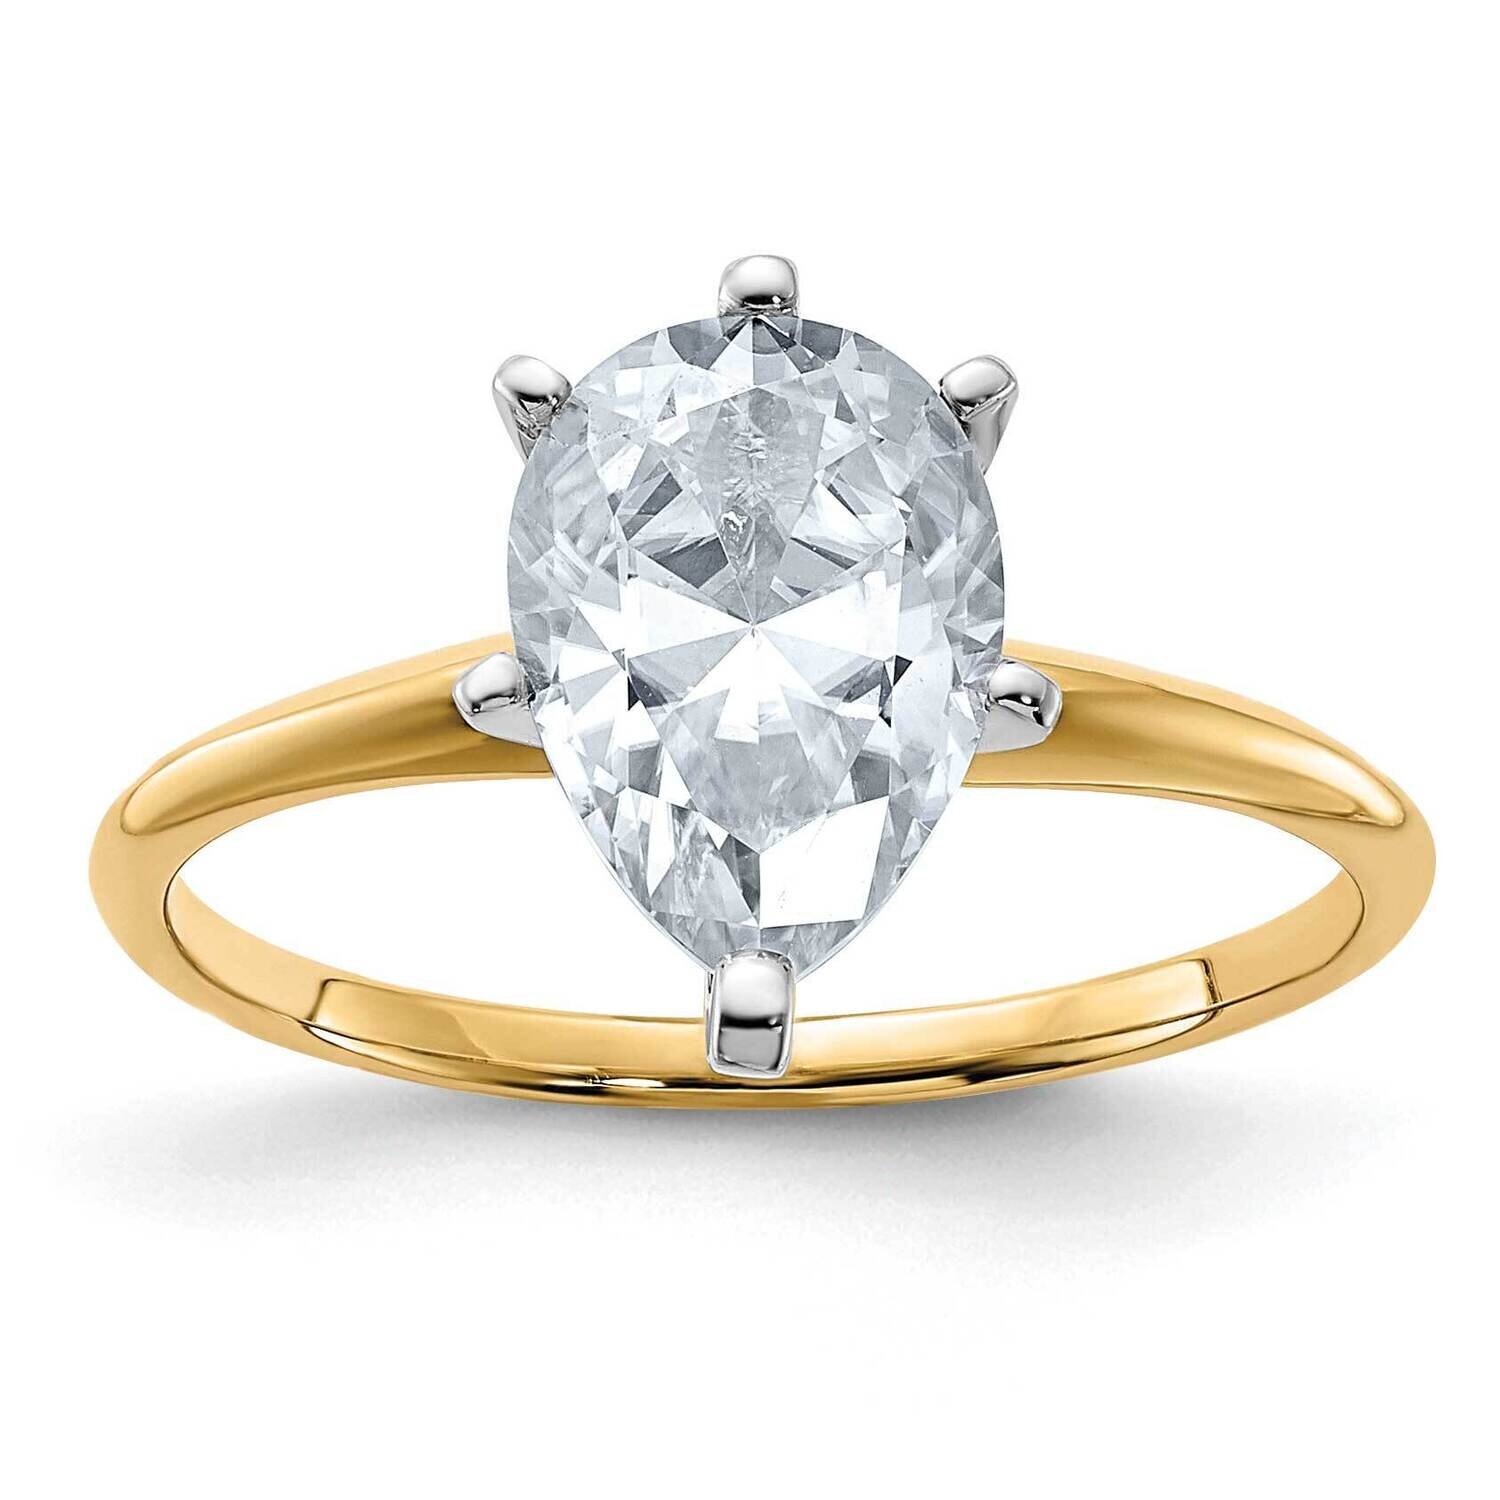 2ct. D E F Pure Light Pear Moissanite Solitaire Ring 14k Gold YGSH15A-15MP-7